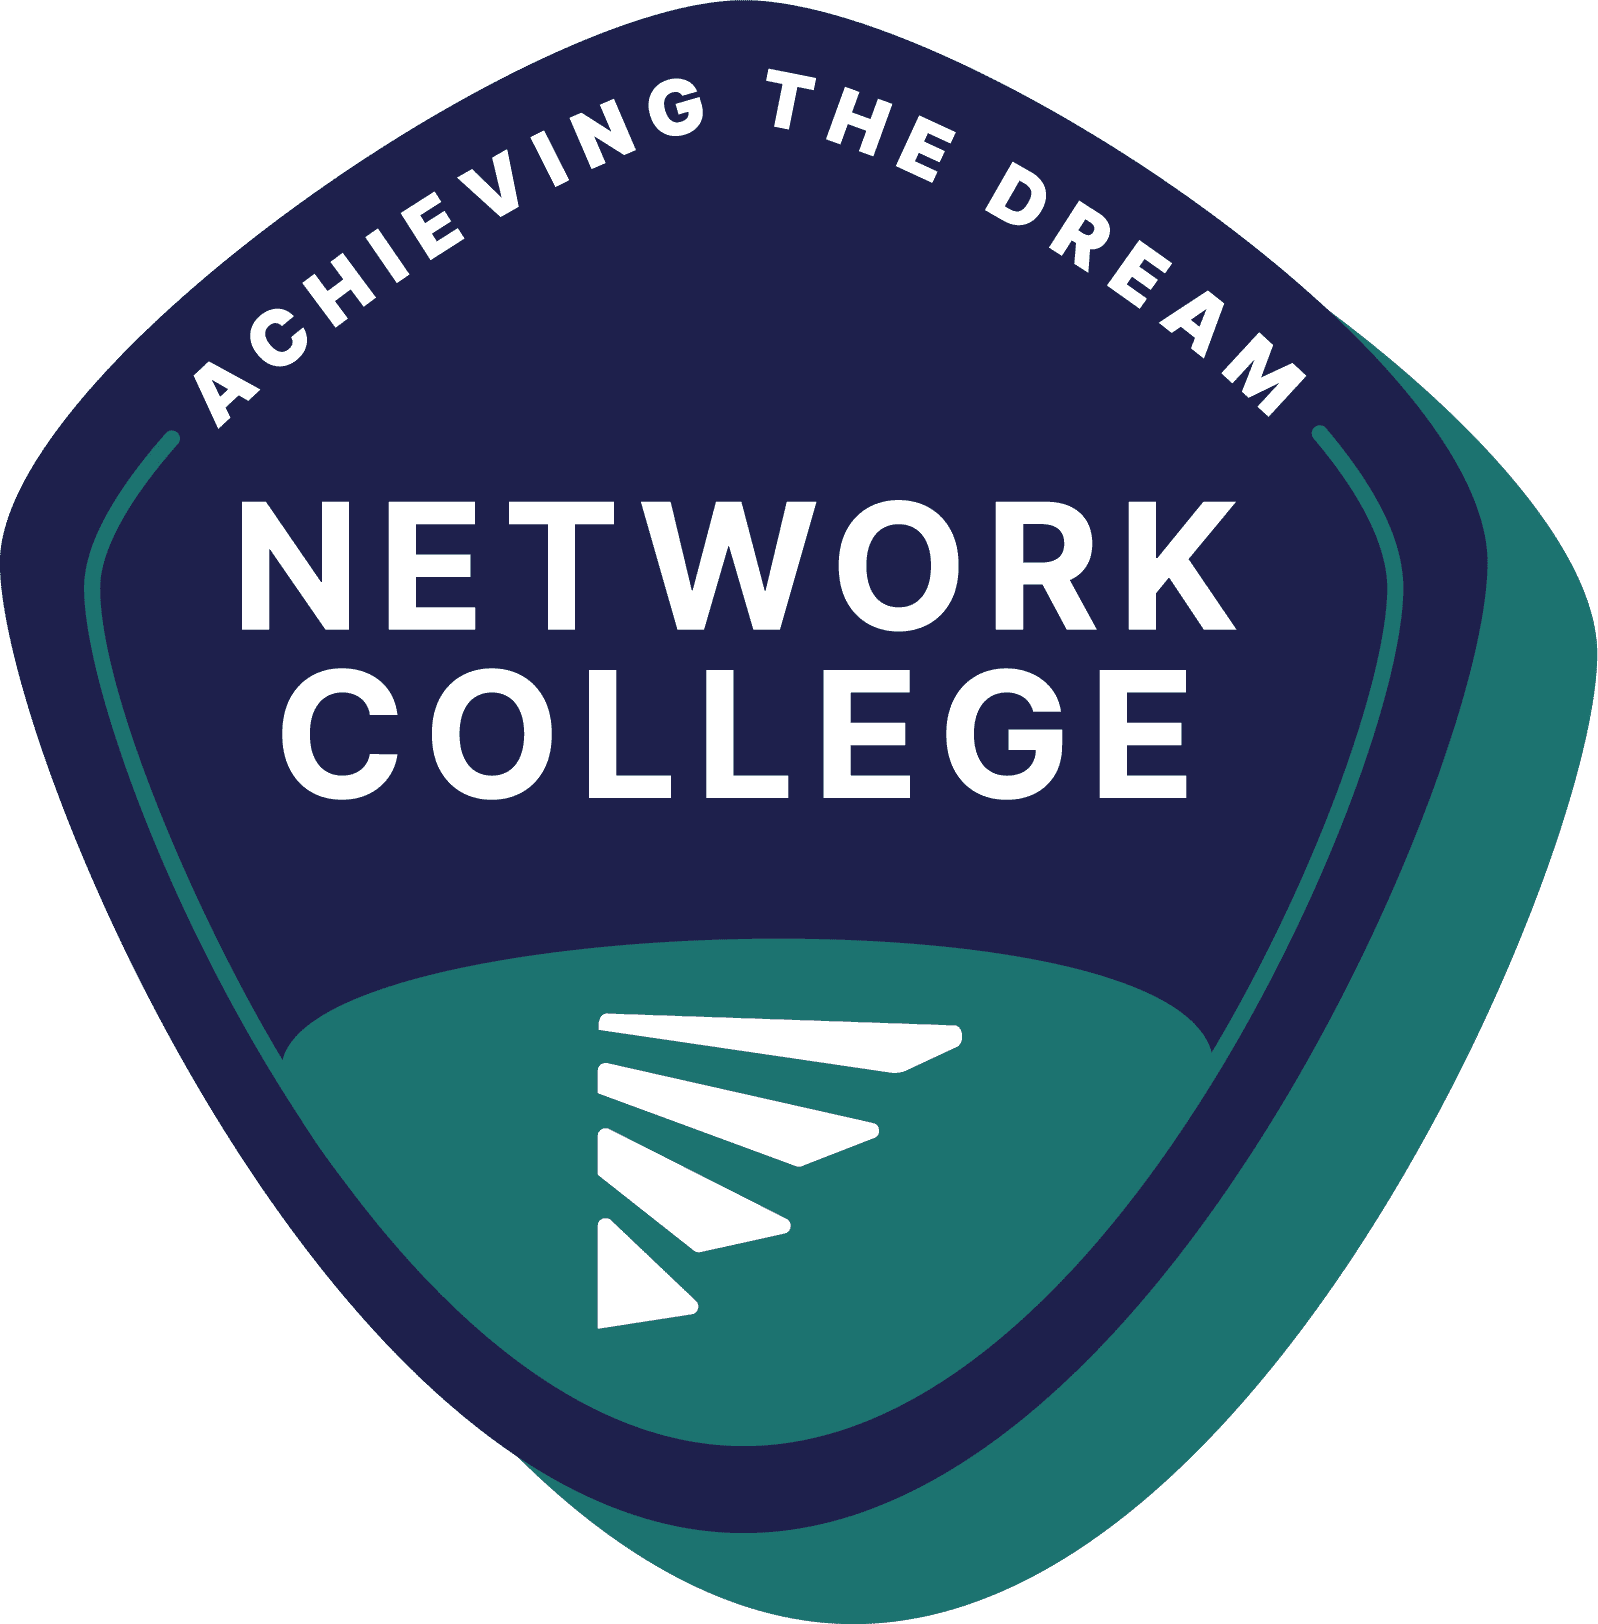 Achieving the Dream Network College